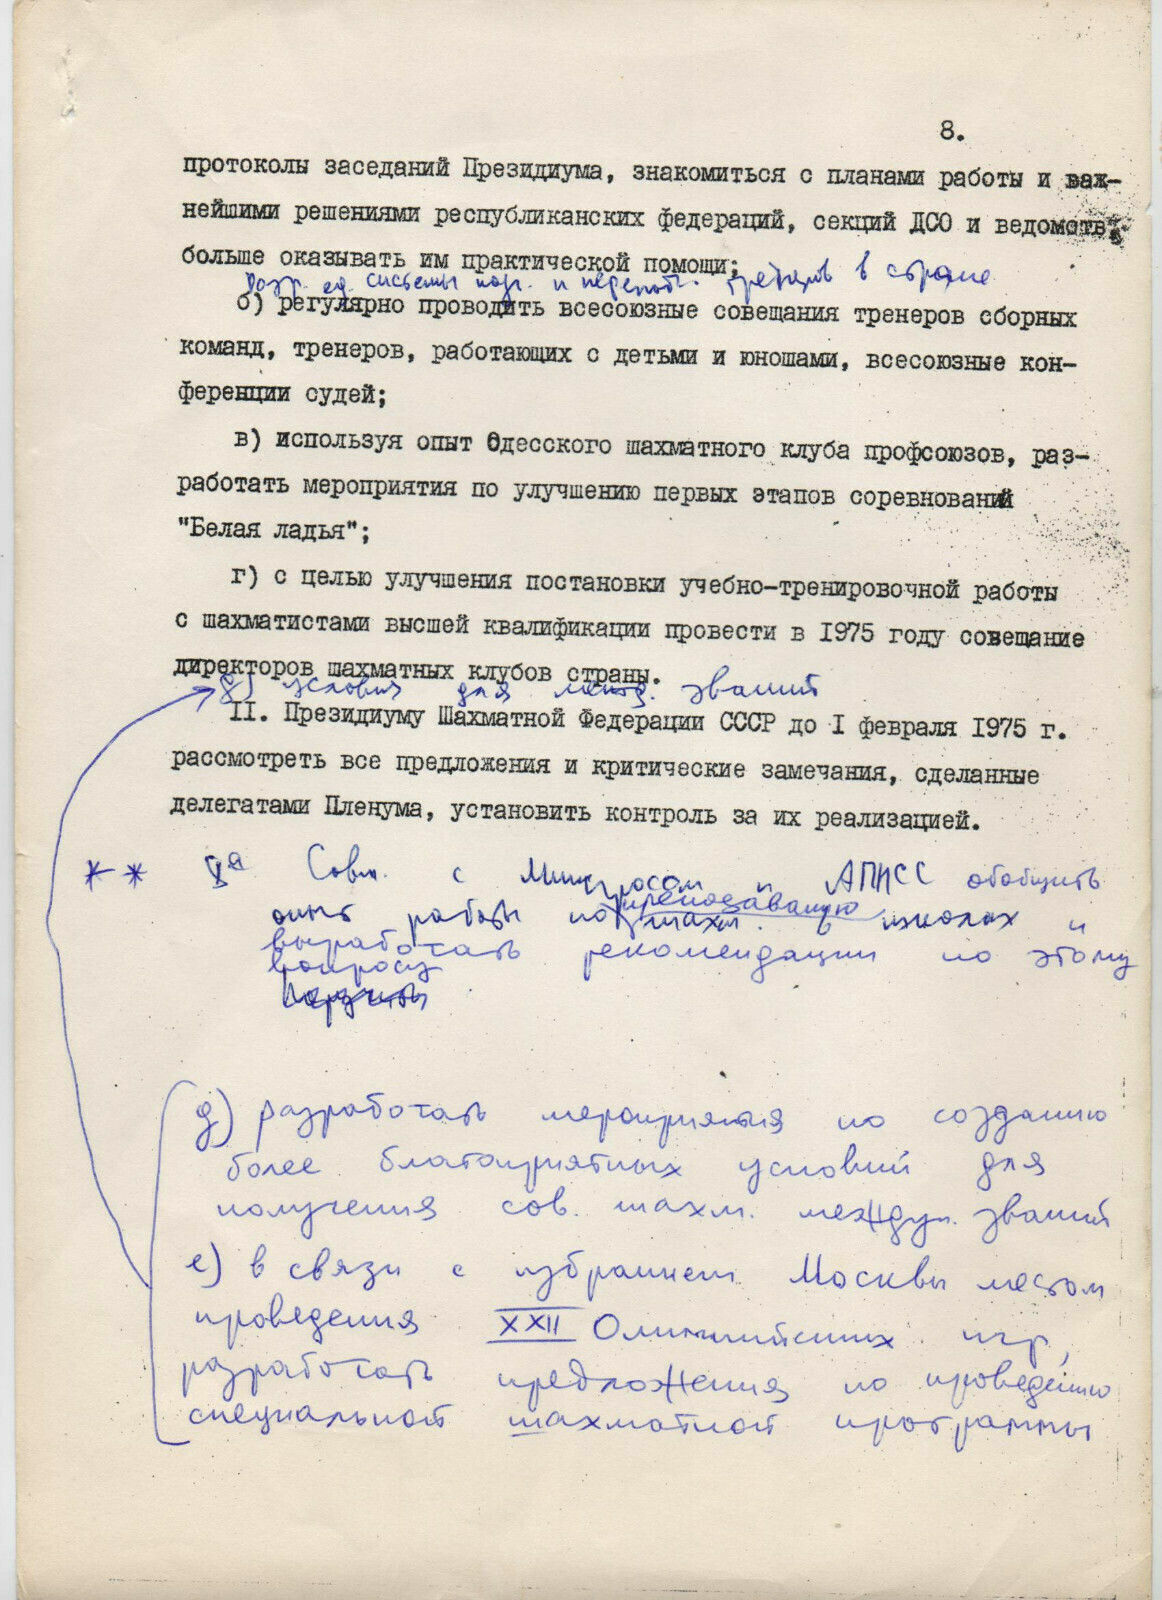 11589.Russian Chess: Resolution of Plenum of USSR Chess Federation. November 24, 1974